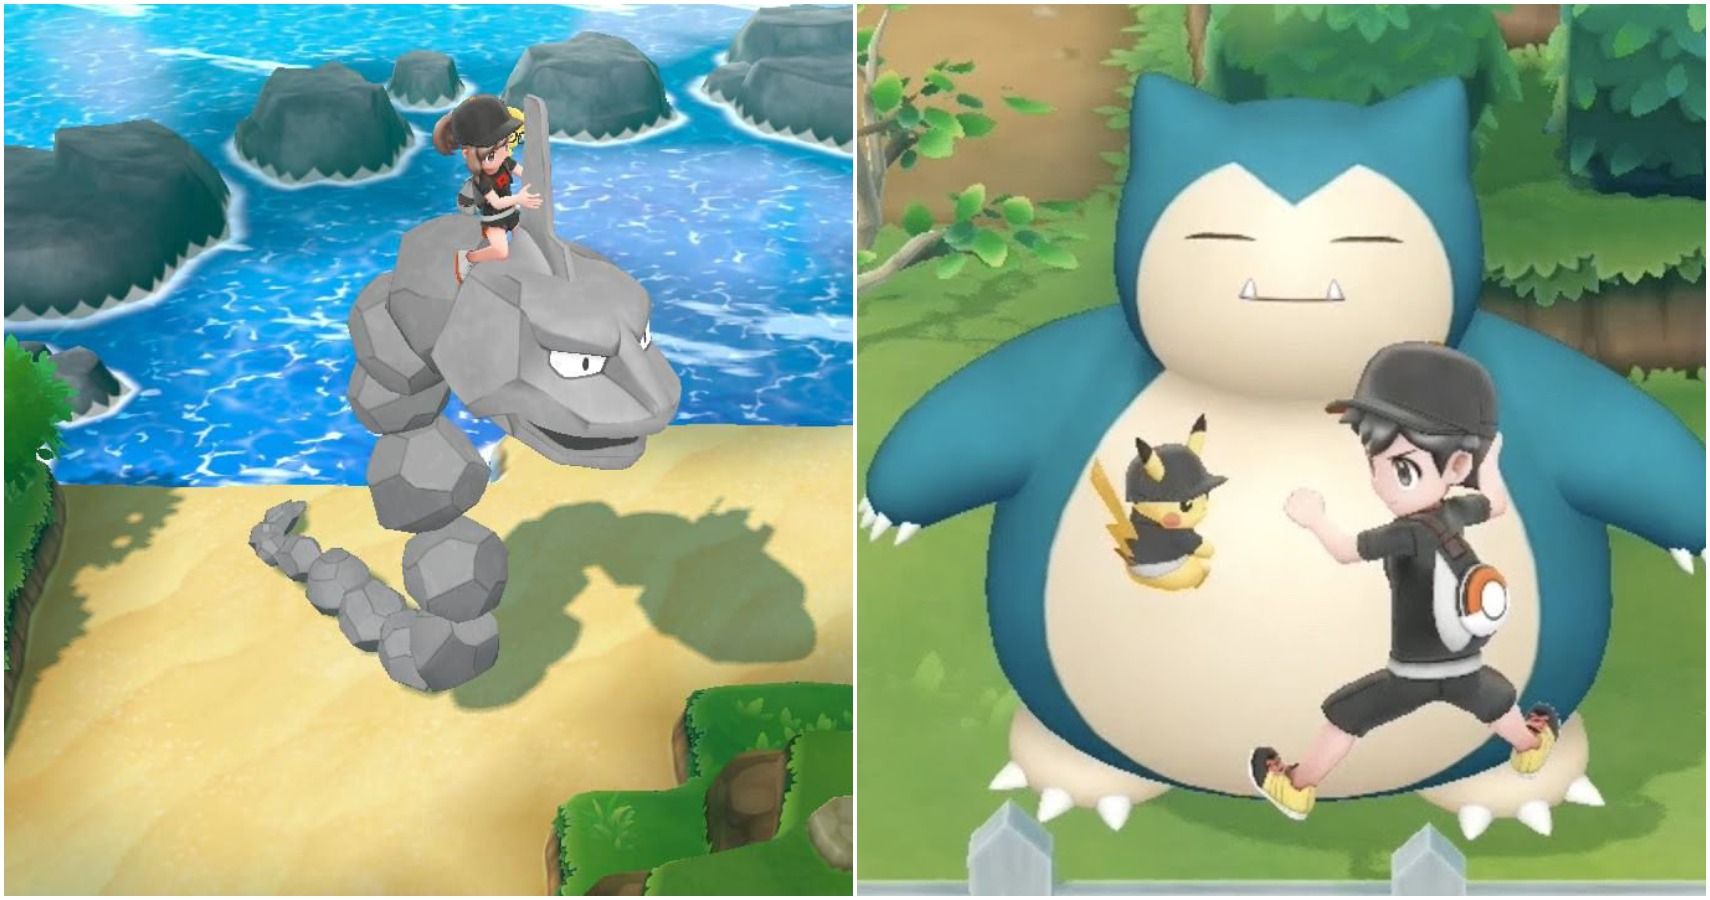 Every Pokemon That You Can Ride In Let's Go, Ranked